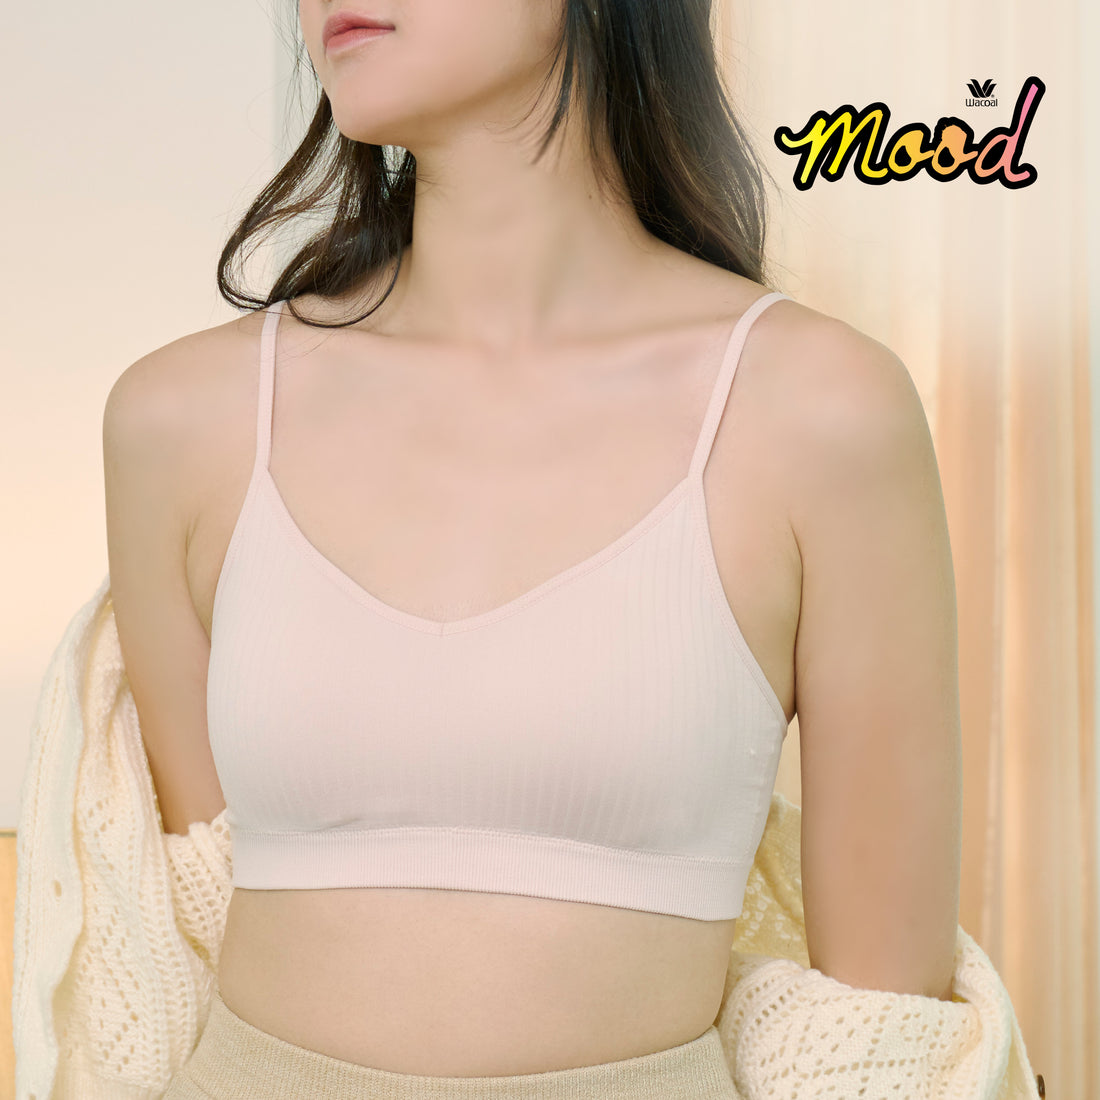 Wacoal Myanmar - In light color, make all girls look so bright and much  sexier. #WacoalMyanmar #Bra #CoolInnovation Model code: WB3J45 Size: A-C  70-80